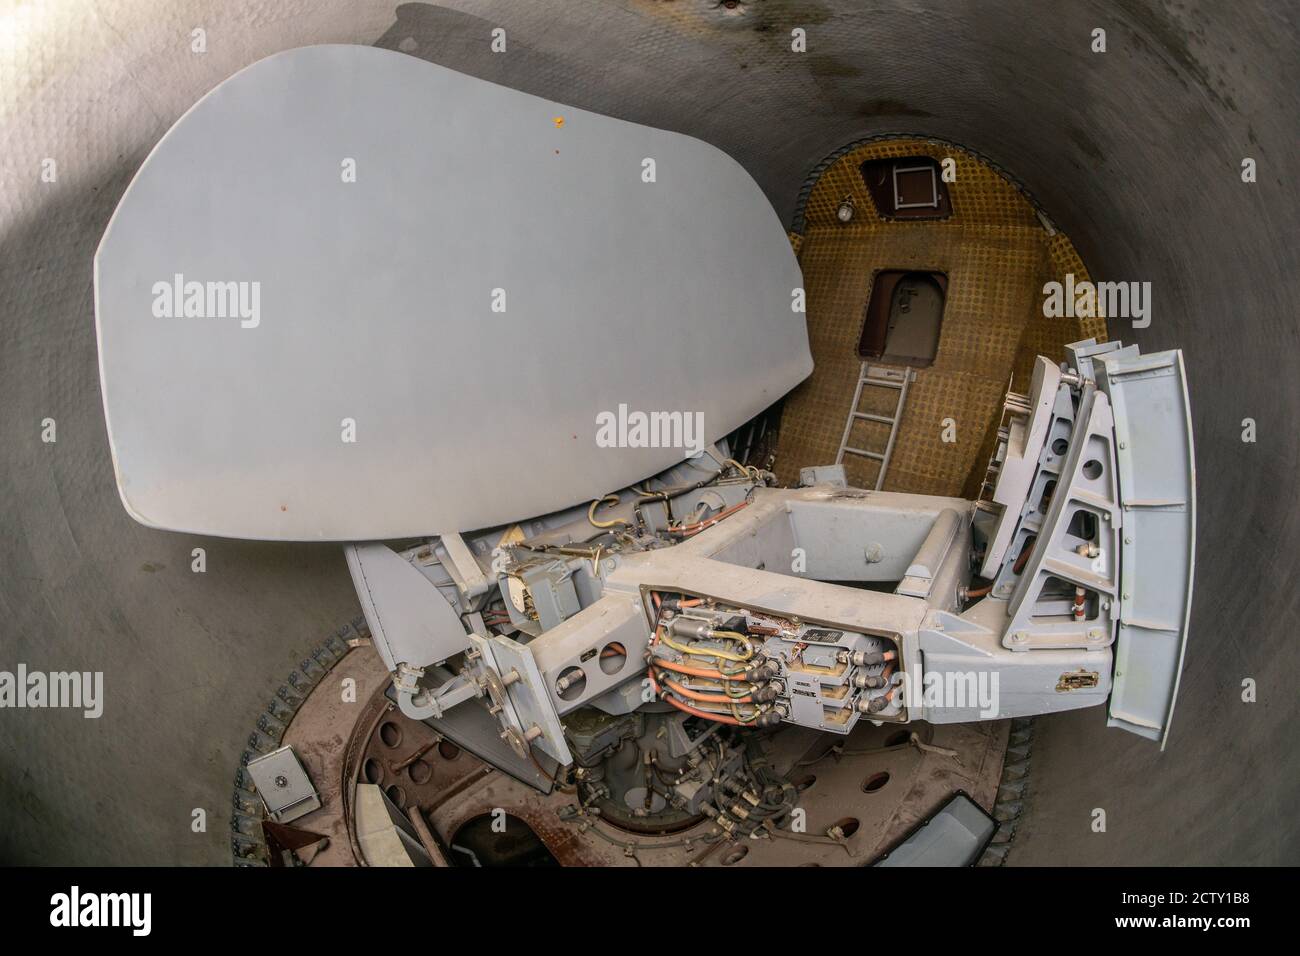 These jaw-dropping aerial and internal shots taken by photo-reporter Lana  Sator showsecret Russian seaplane bigger than a jumbo jet now beached as a  'museum' in Derbent, Russian Federation A top-secret Russian seaplane,